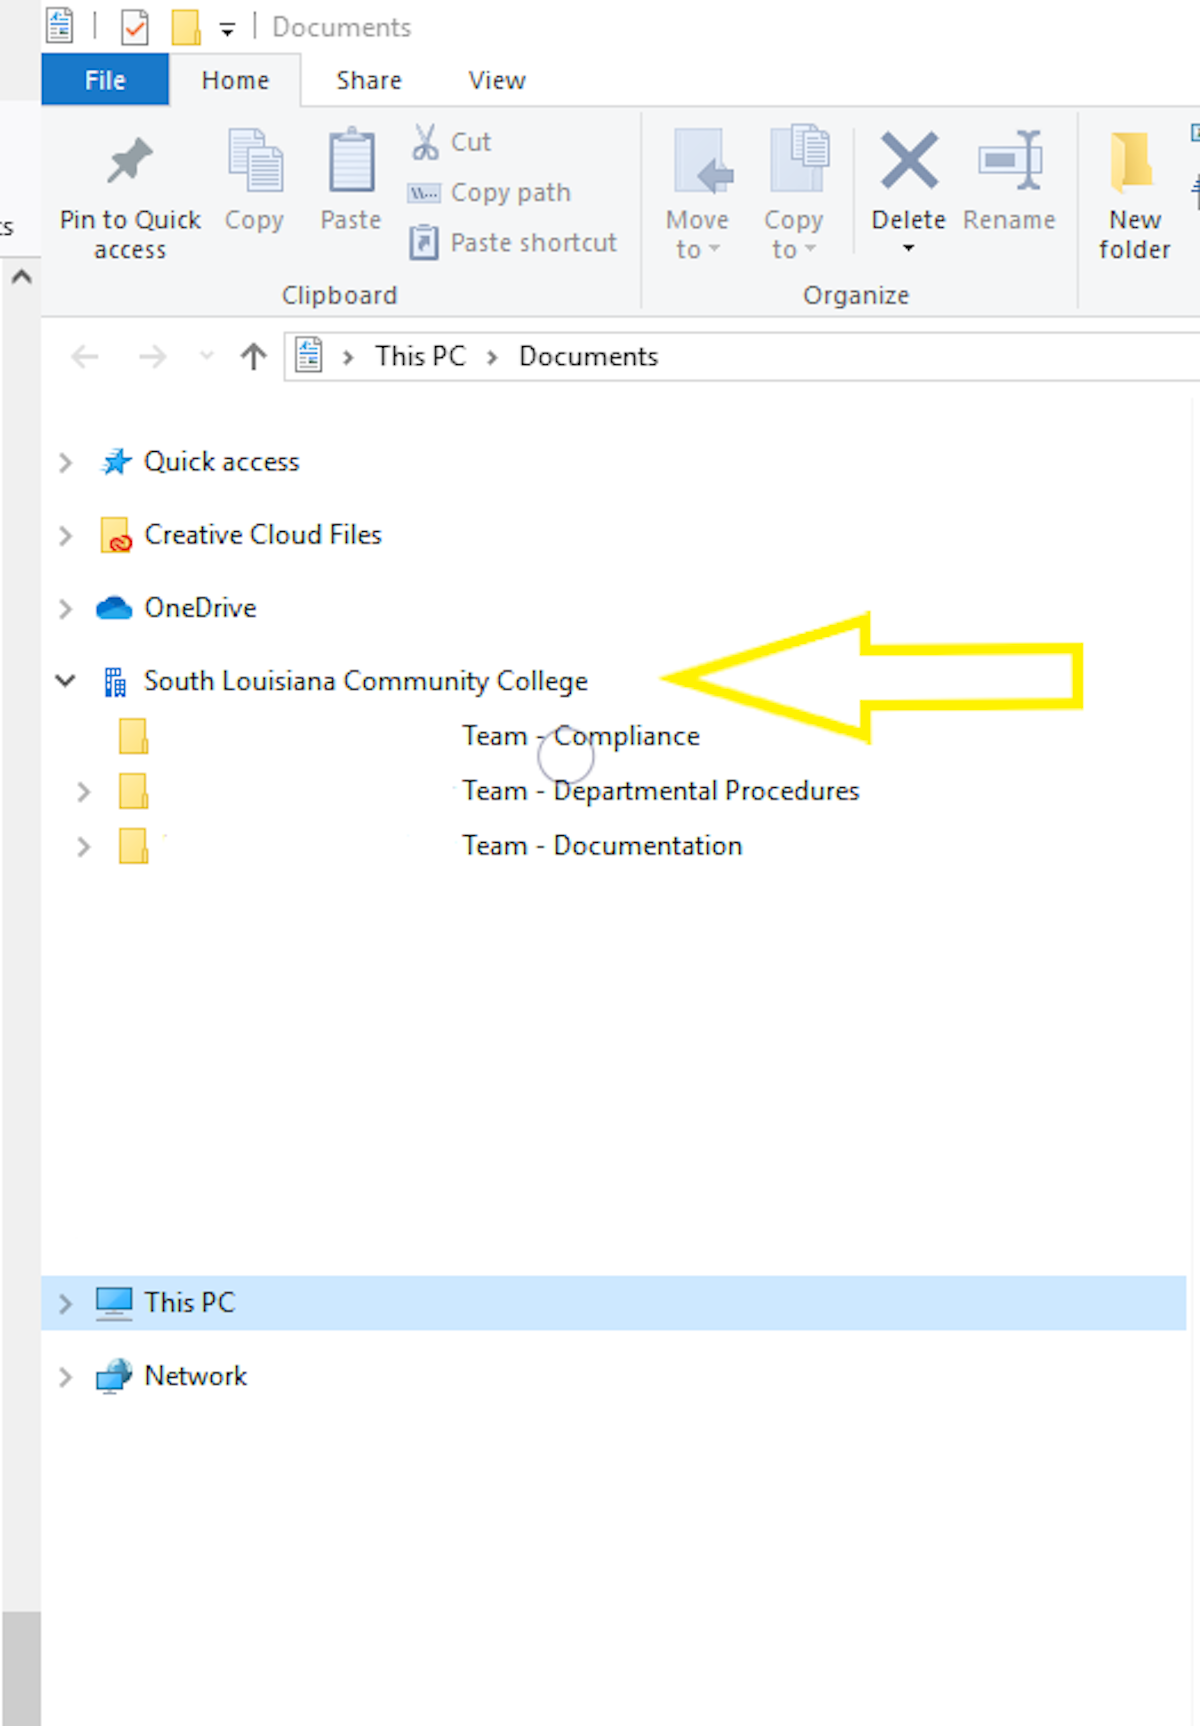 Under the Windows file explorer, there will now be a section called "South Louisiana Community College". Each channel that you sync will be a folder listed here.